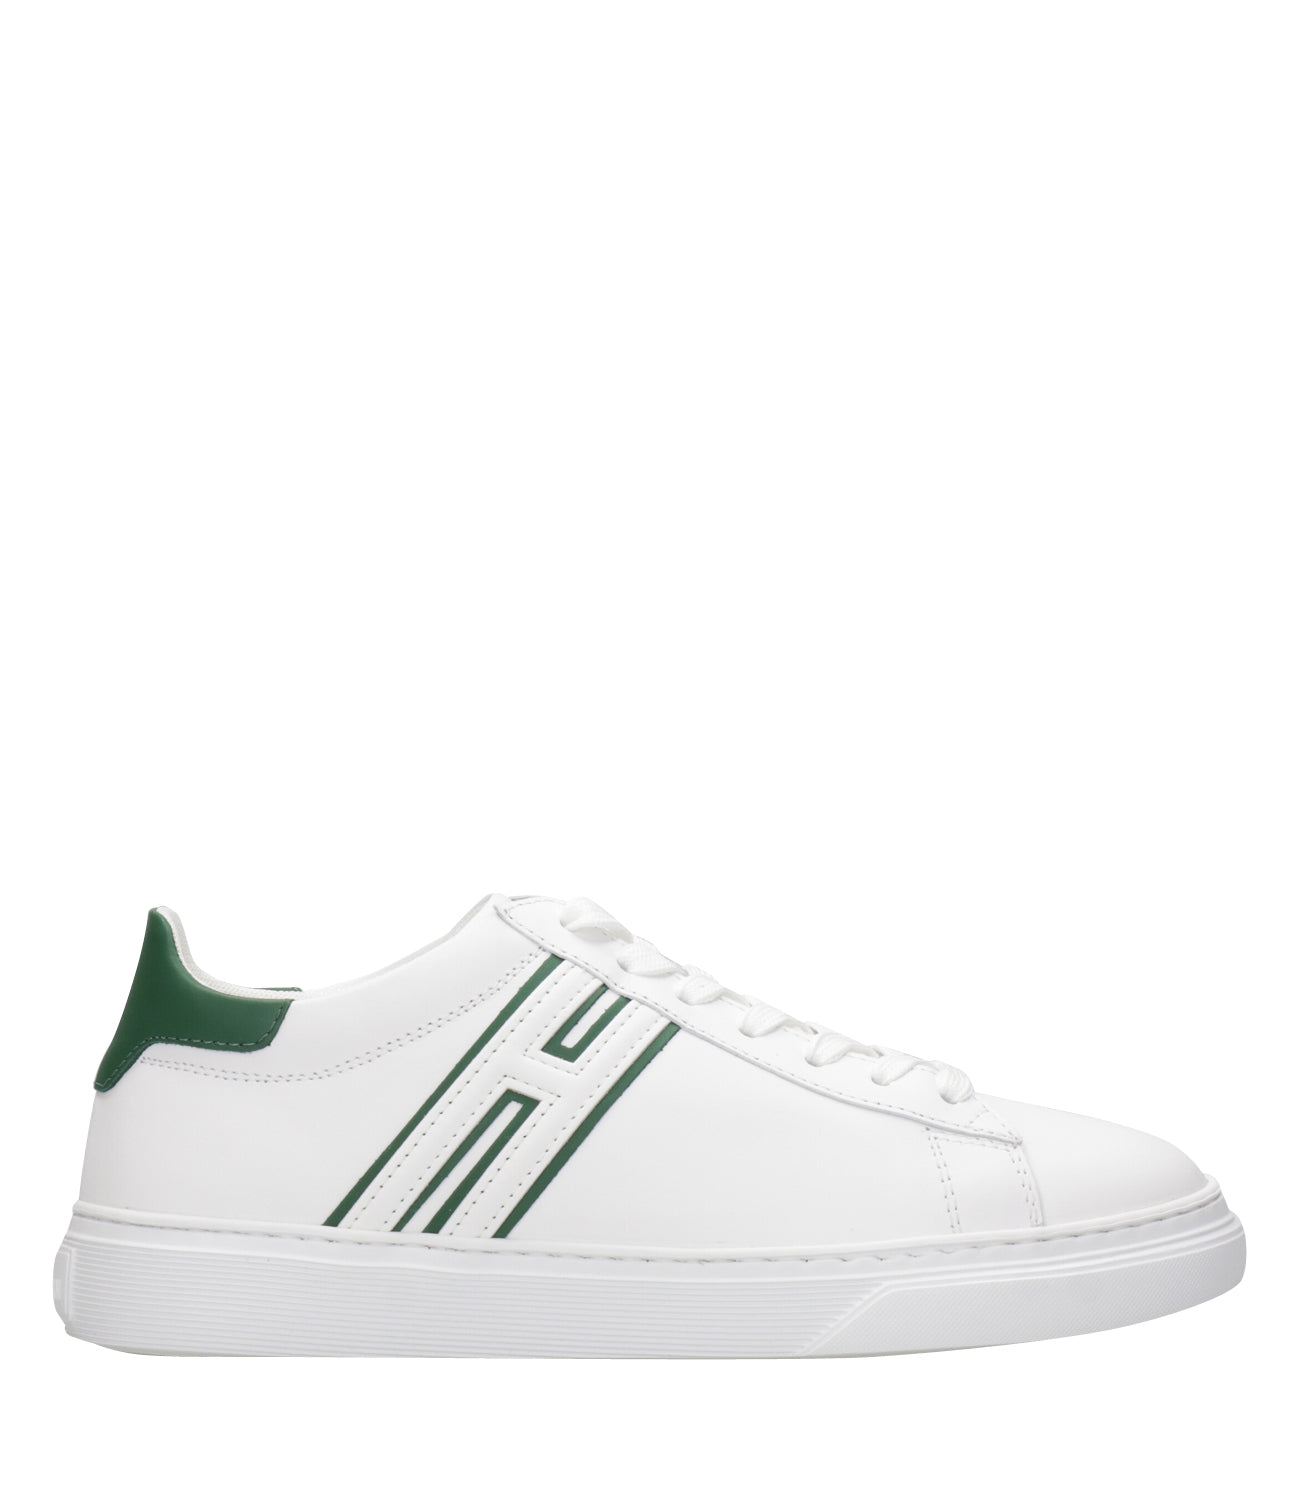 Hogan | Sneakers H365 Canaletto White and Green